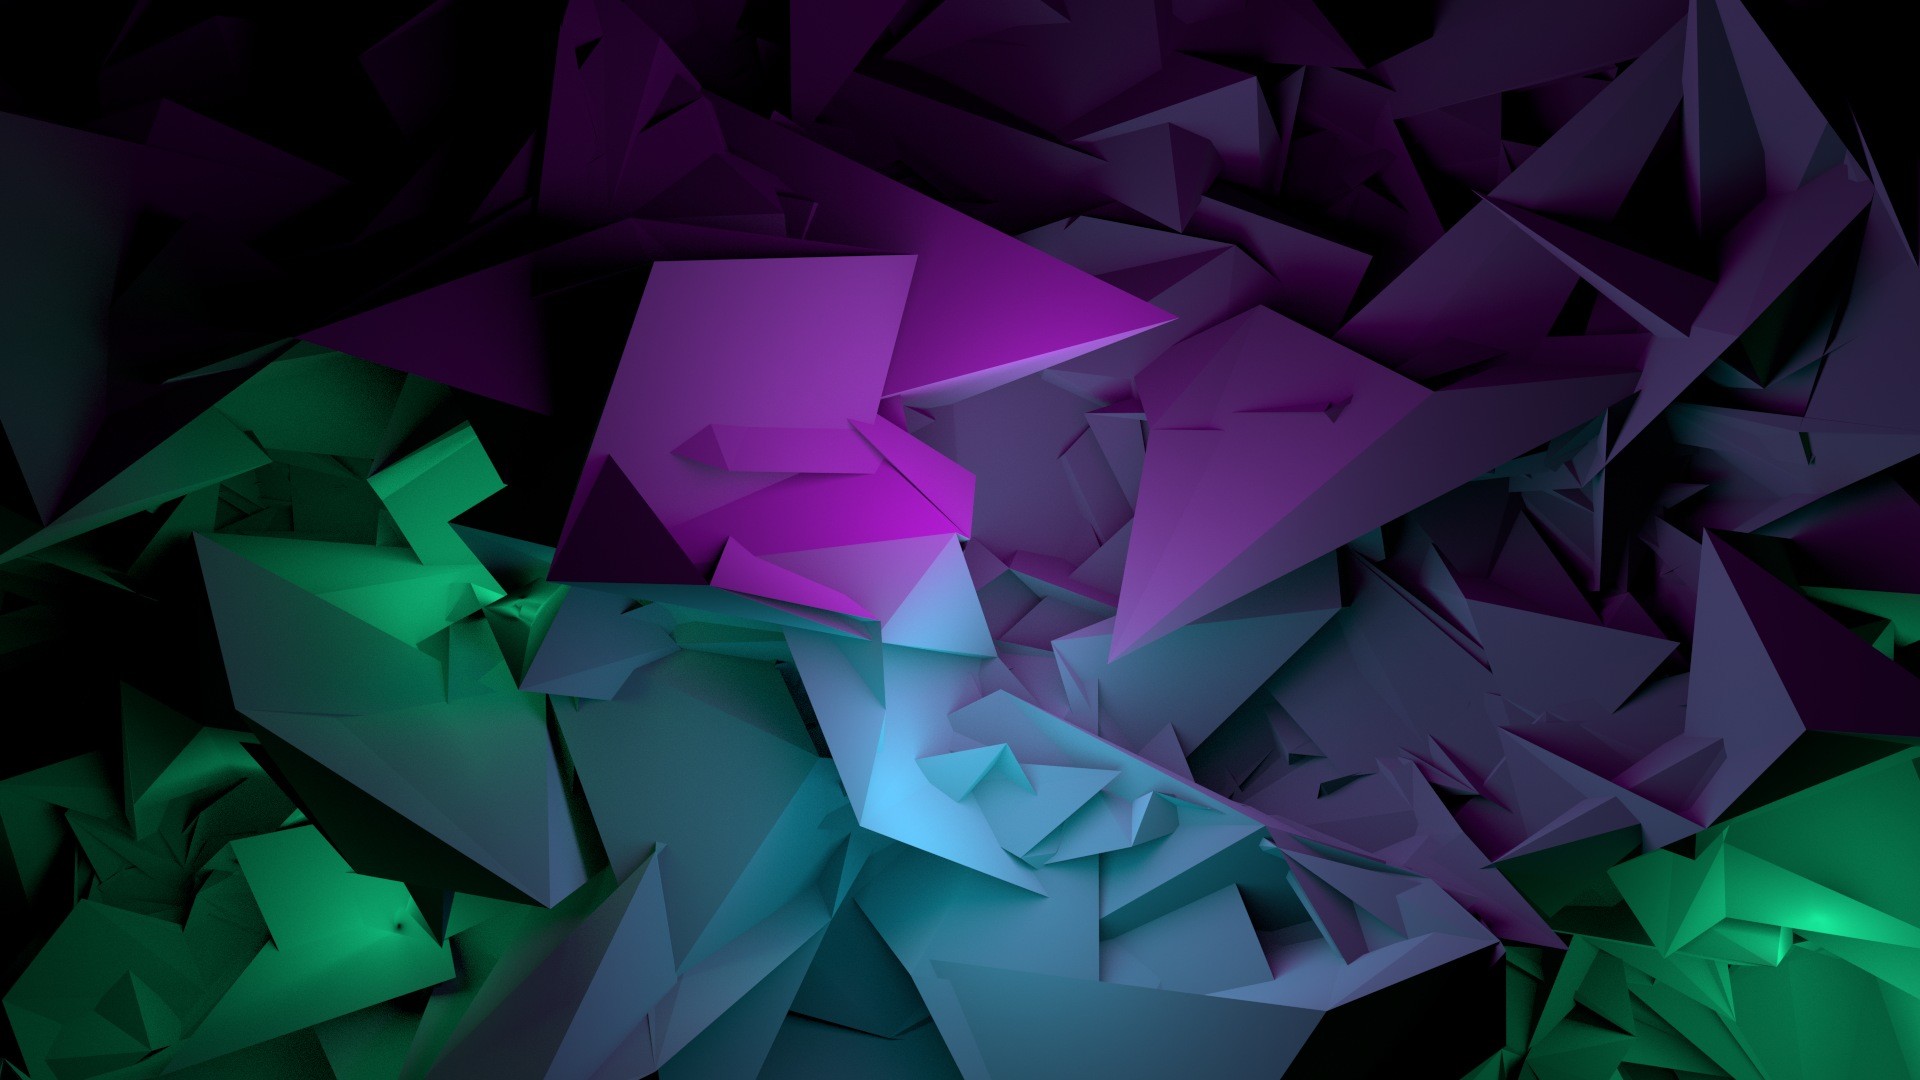 1920x1080 ... Shapes Wallpapers, Fine HDQ Shapes Pics | Nice High Quality Wallpapers  ...